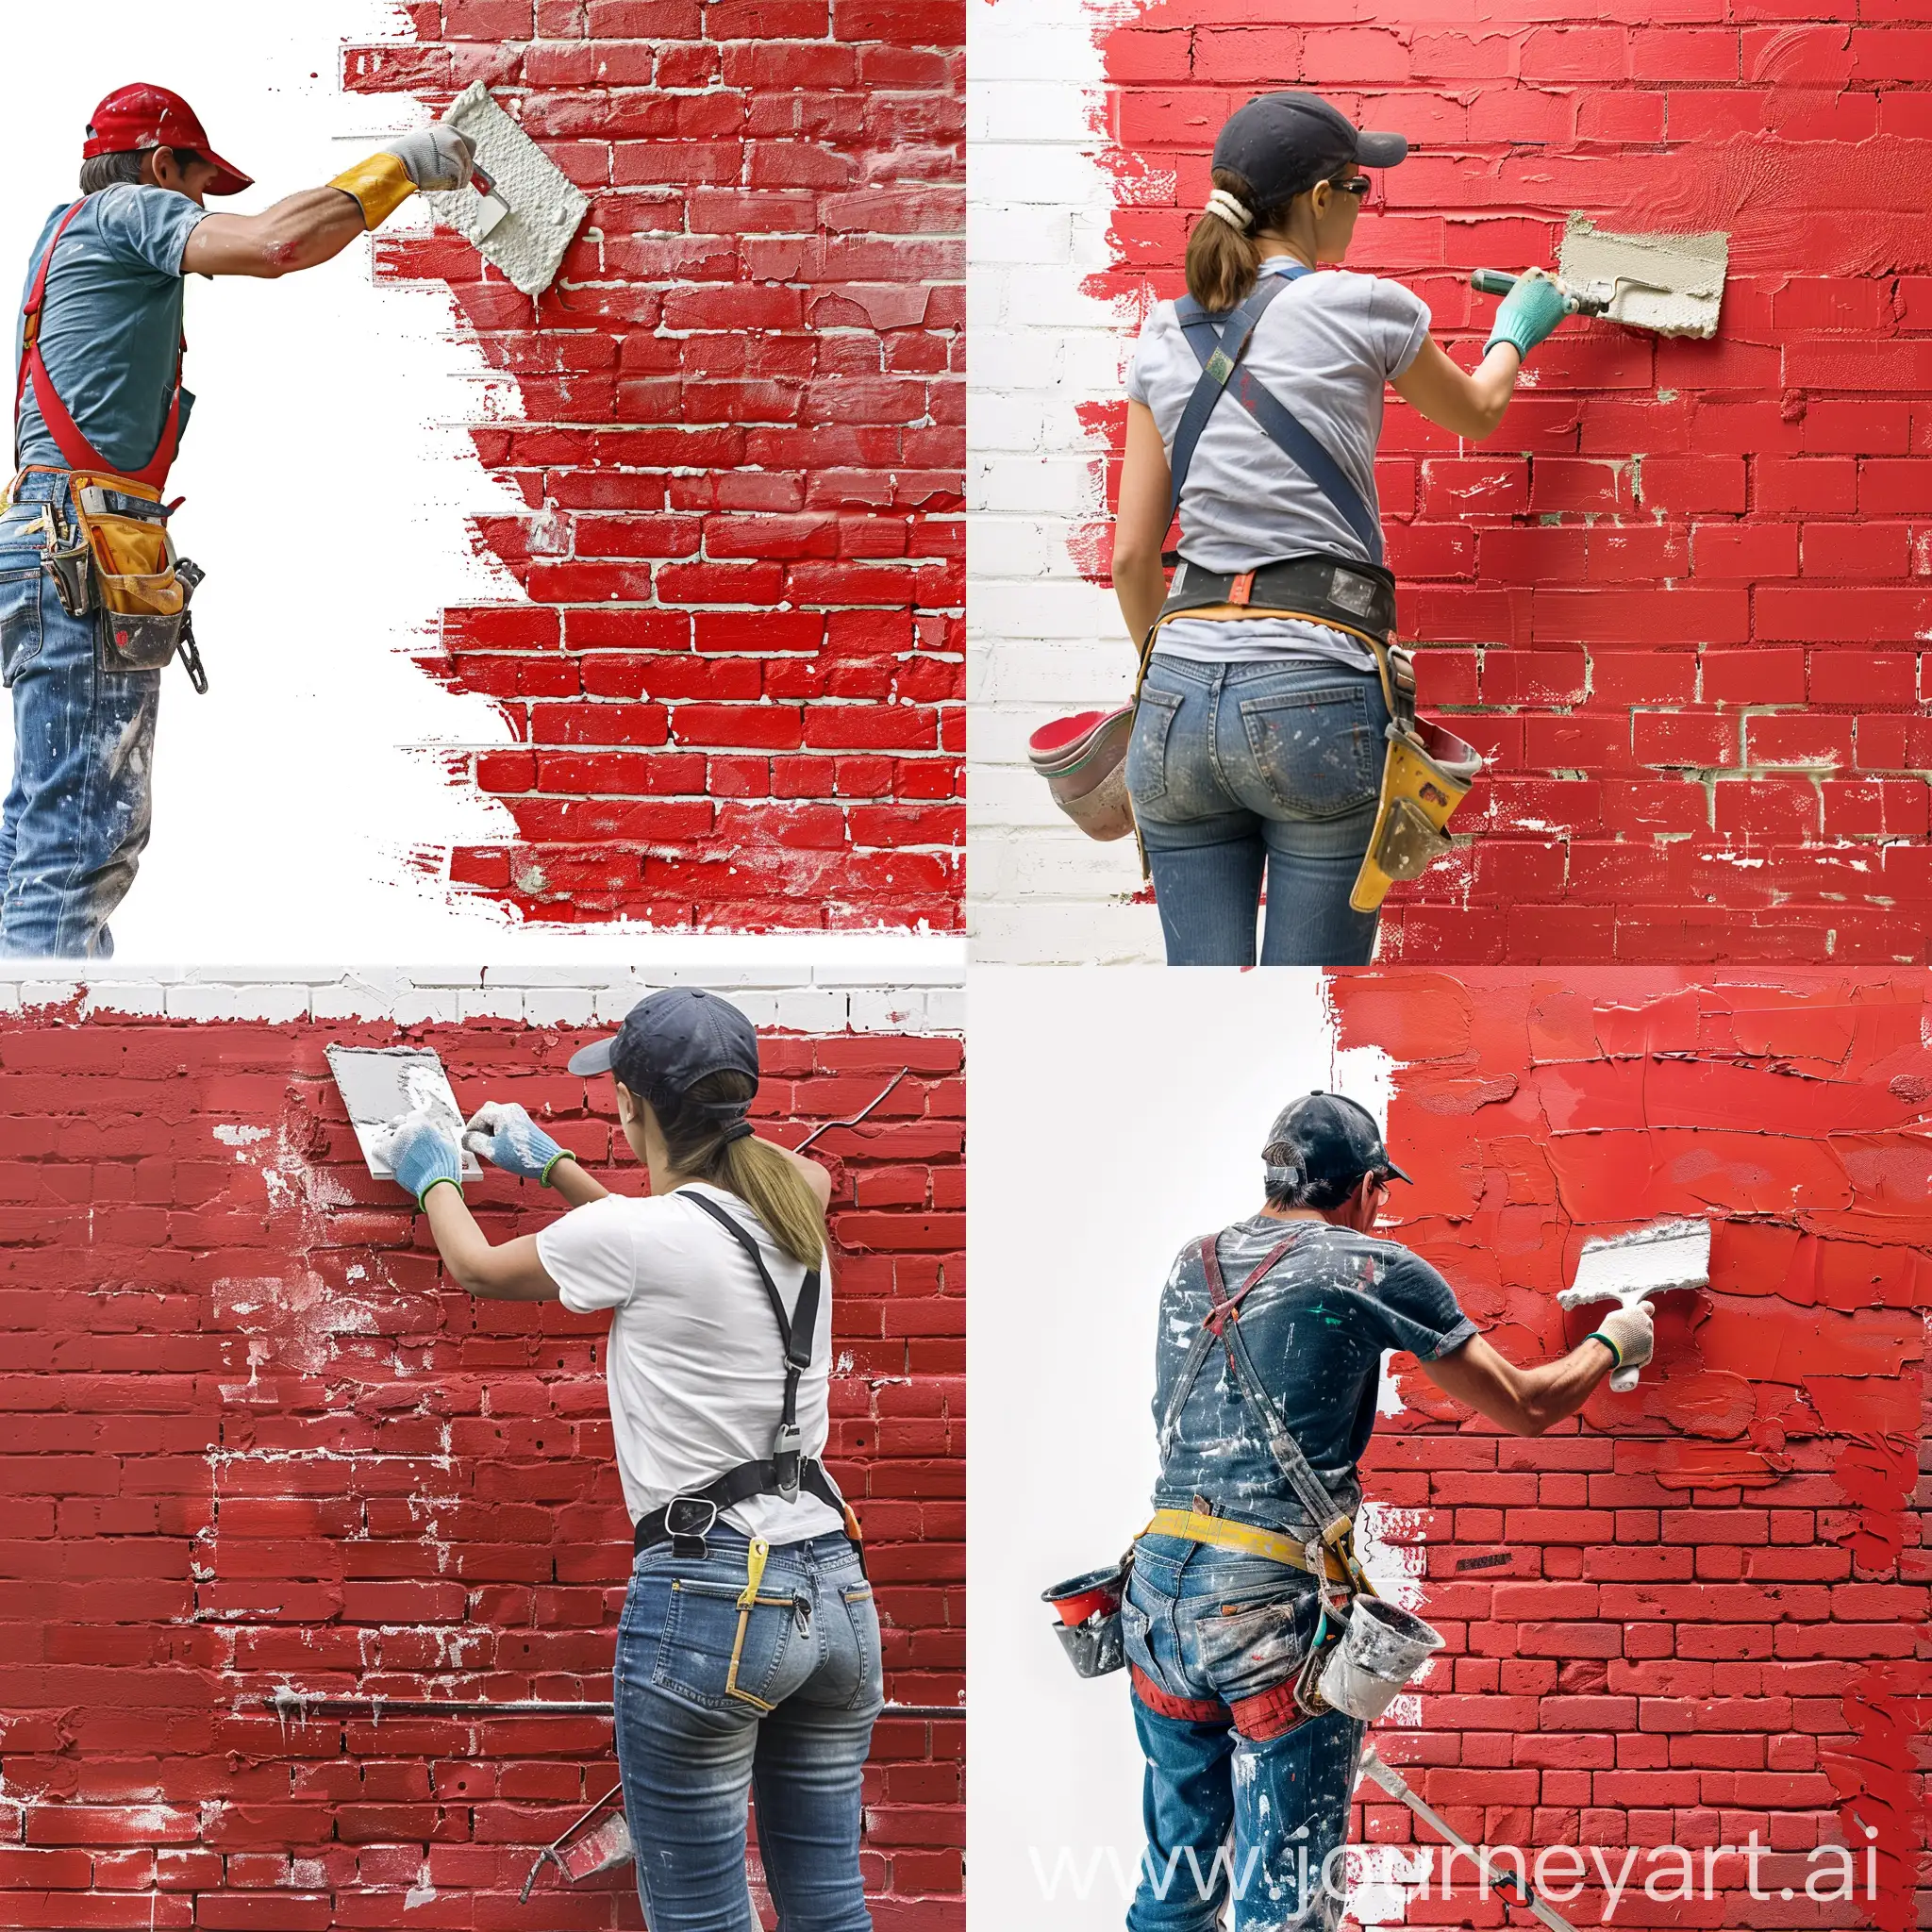 person applying plaster to a red brick wall, white background, ultra-realistic style, wearing work clothes including jeans and a t-shirt, using a trowel, with safety gloves and a hat